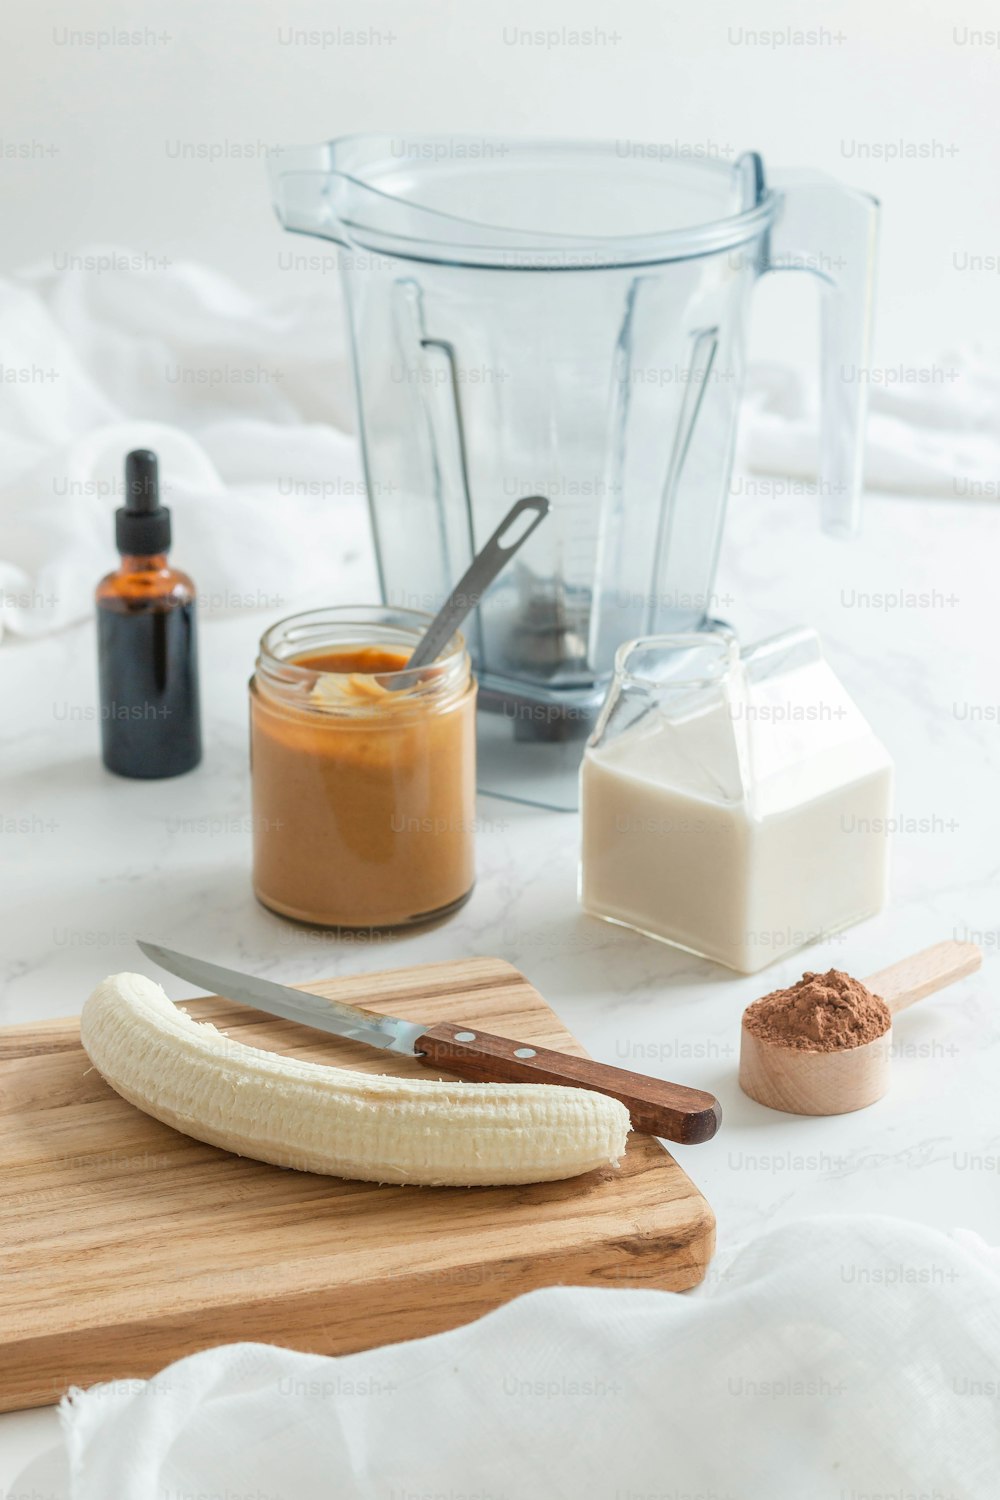 a banana sitting on a cutting board next to a blender